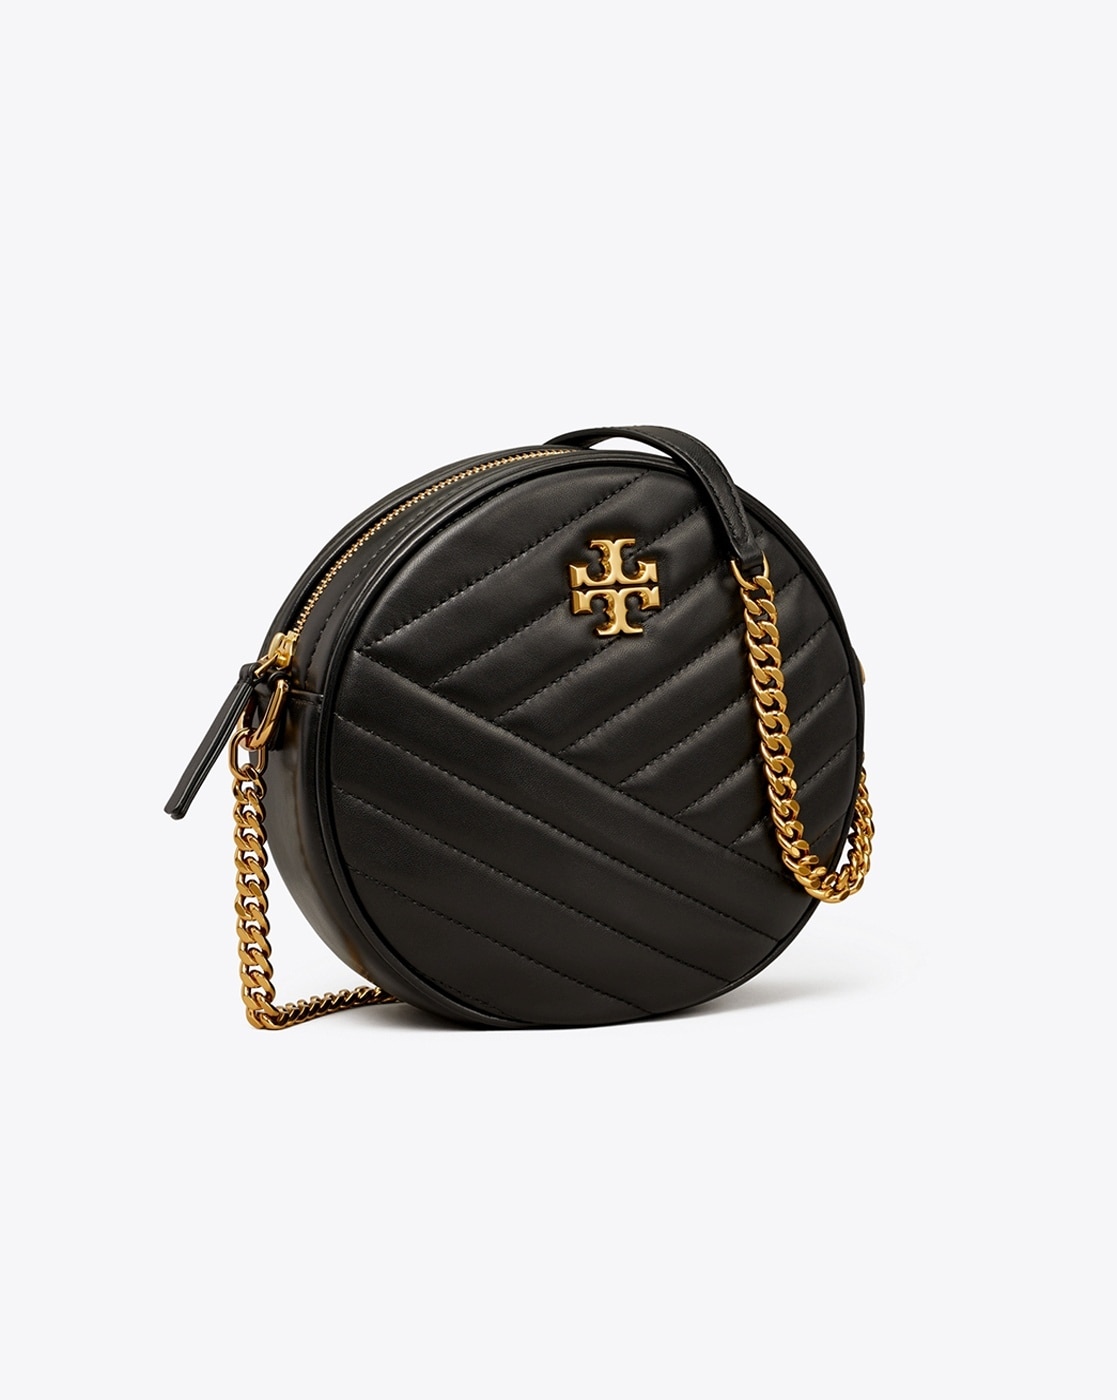 Tory Burch Crossbody Bag Black✨🤩🔥 SHOP NOW 🛍️✨ Delivery Available 🚚🥳 |  Instagram